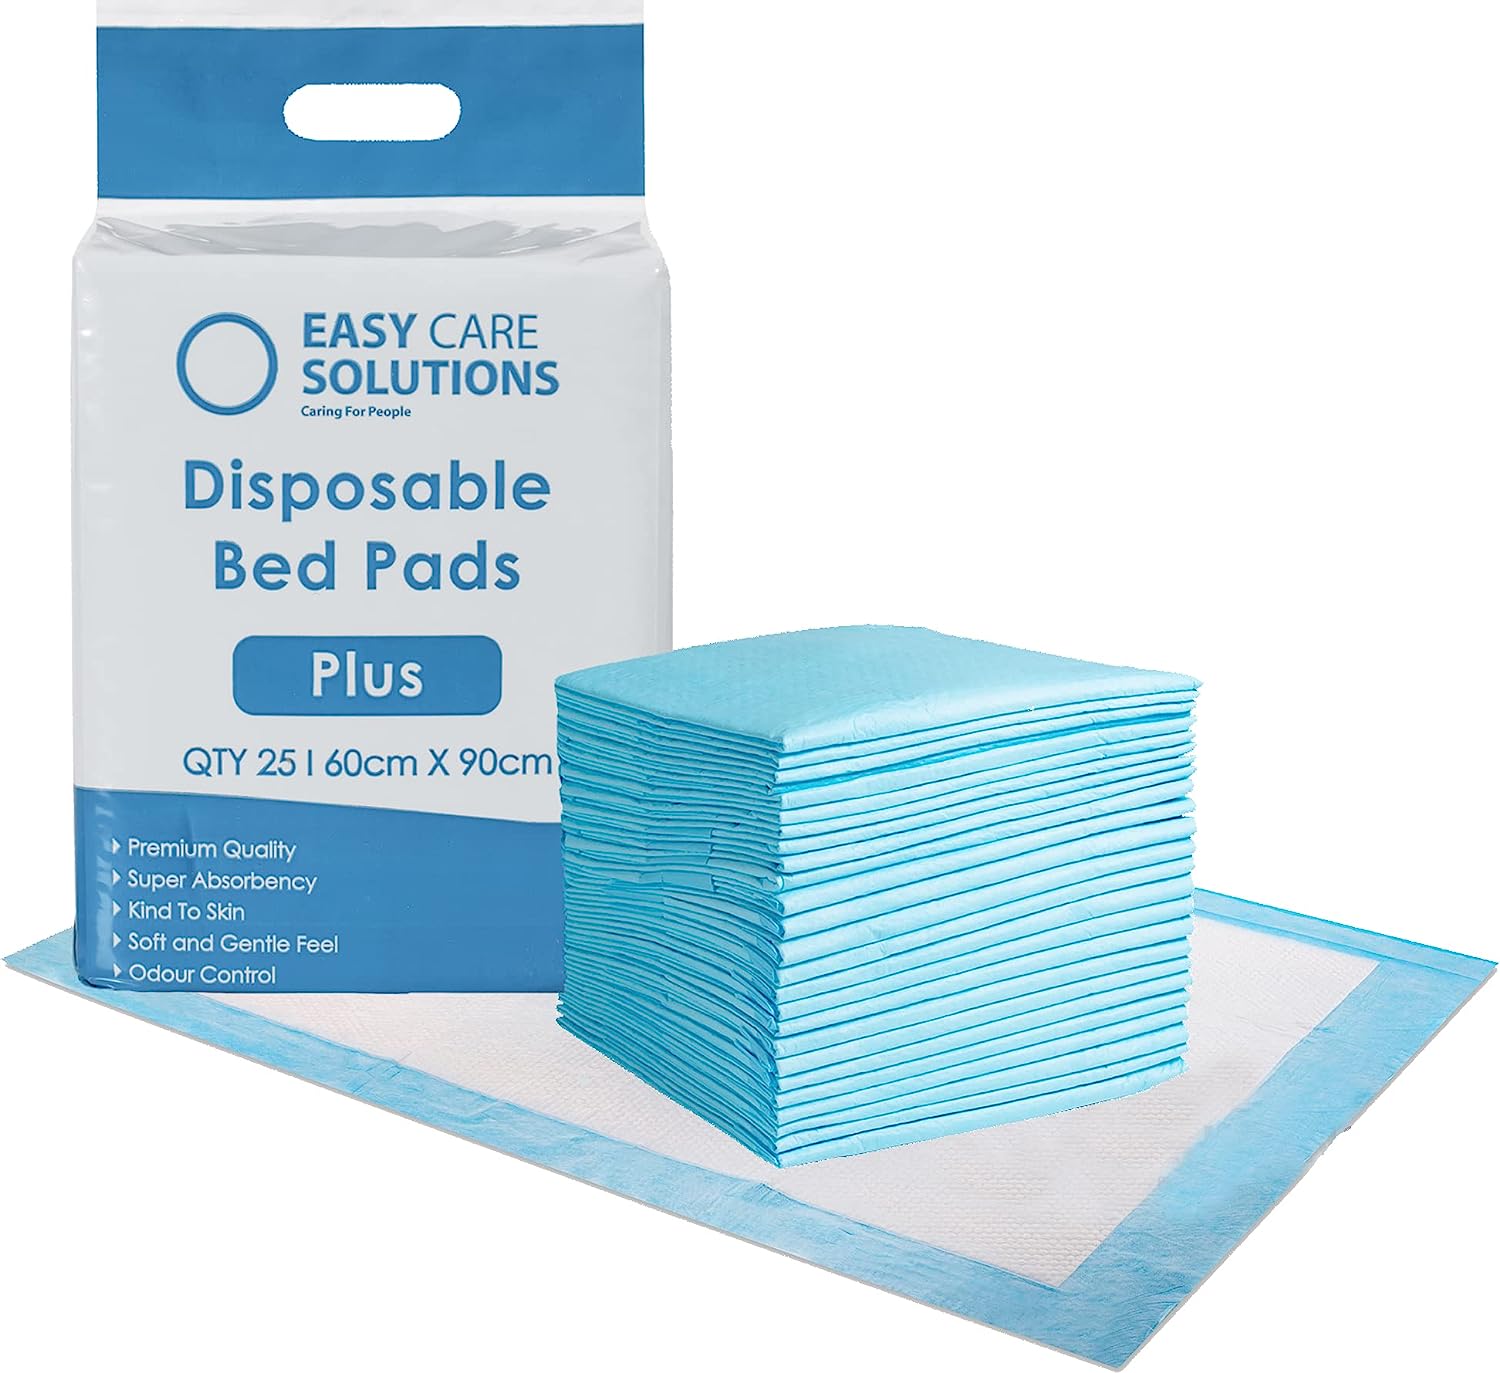 Easy Care Solutions Disposable Incontinence Bed Pads Plus 90 x 60 cm Pack of 25 RRP £9.99 CLEARANCE XL £7.99